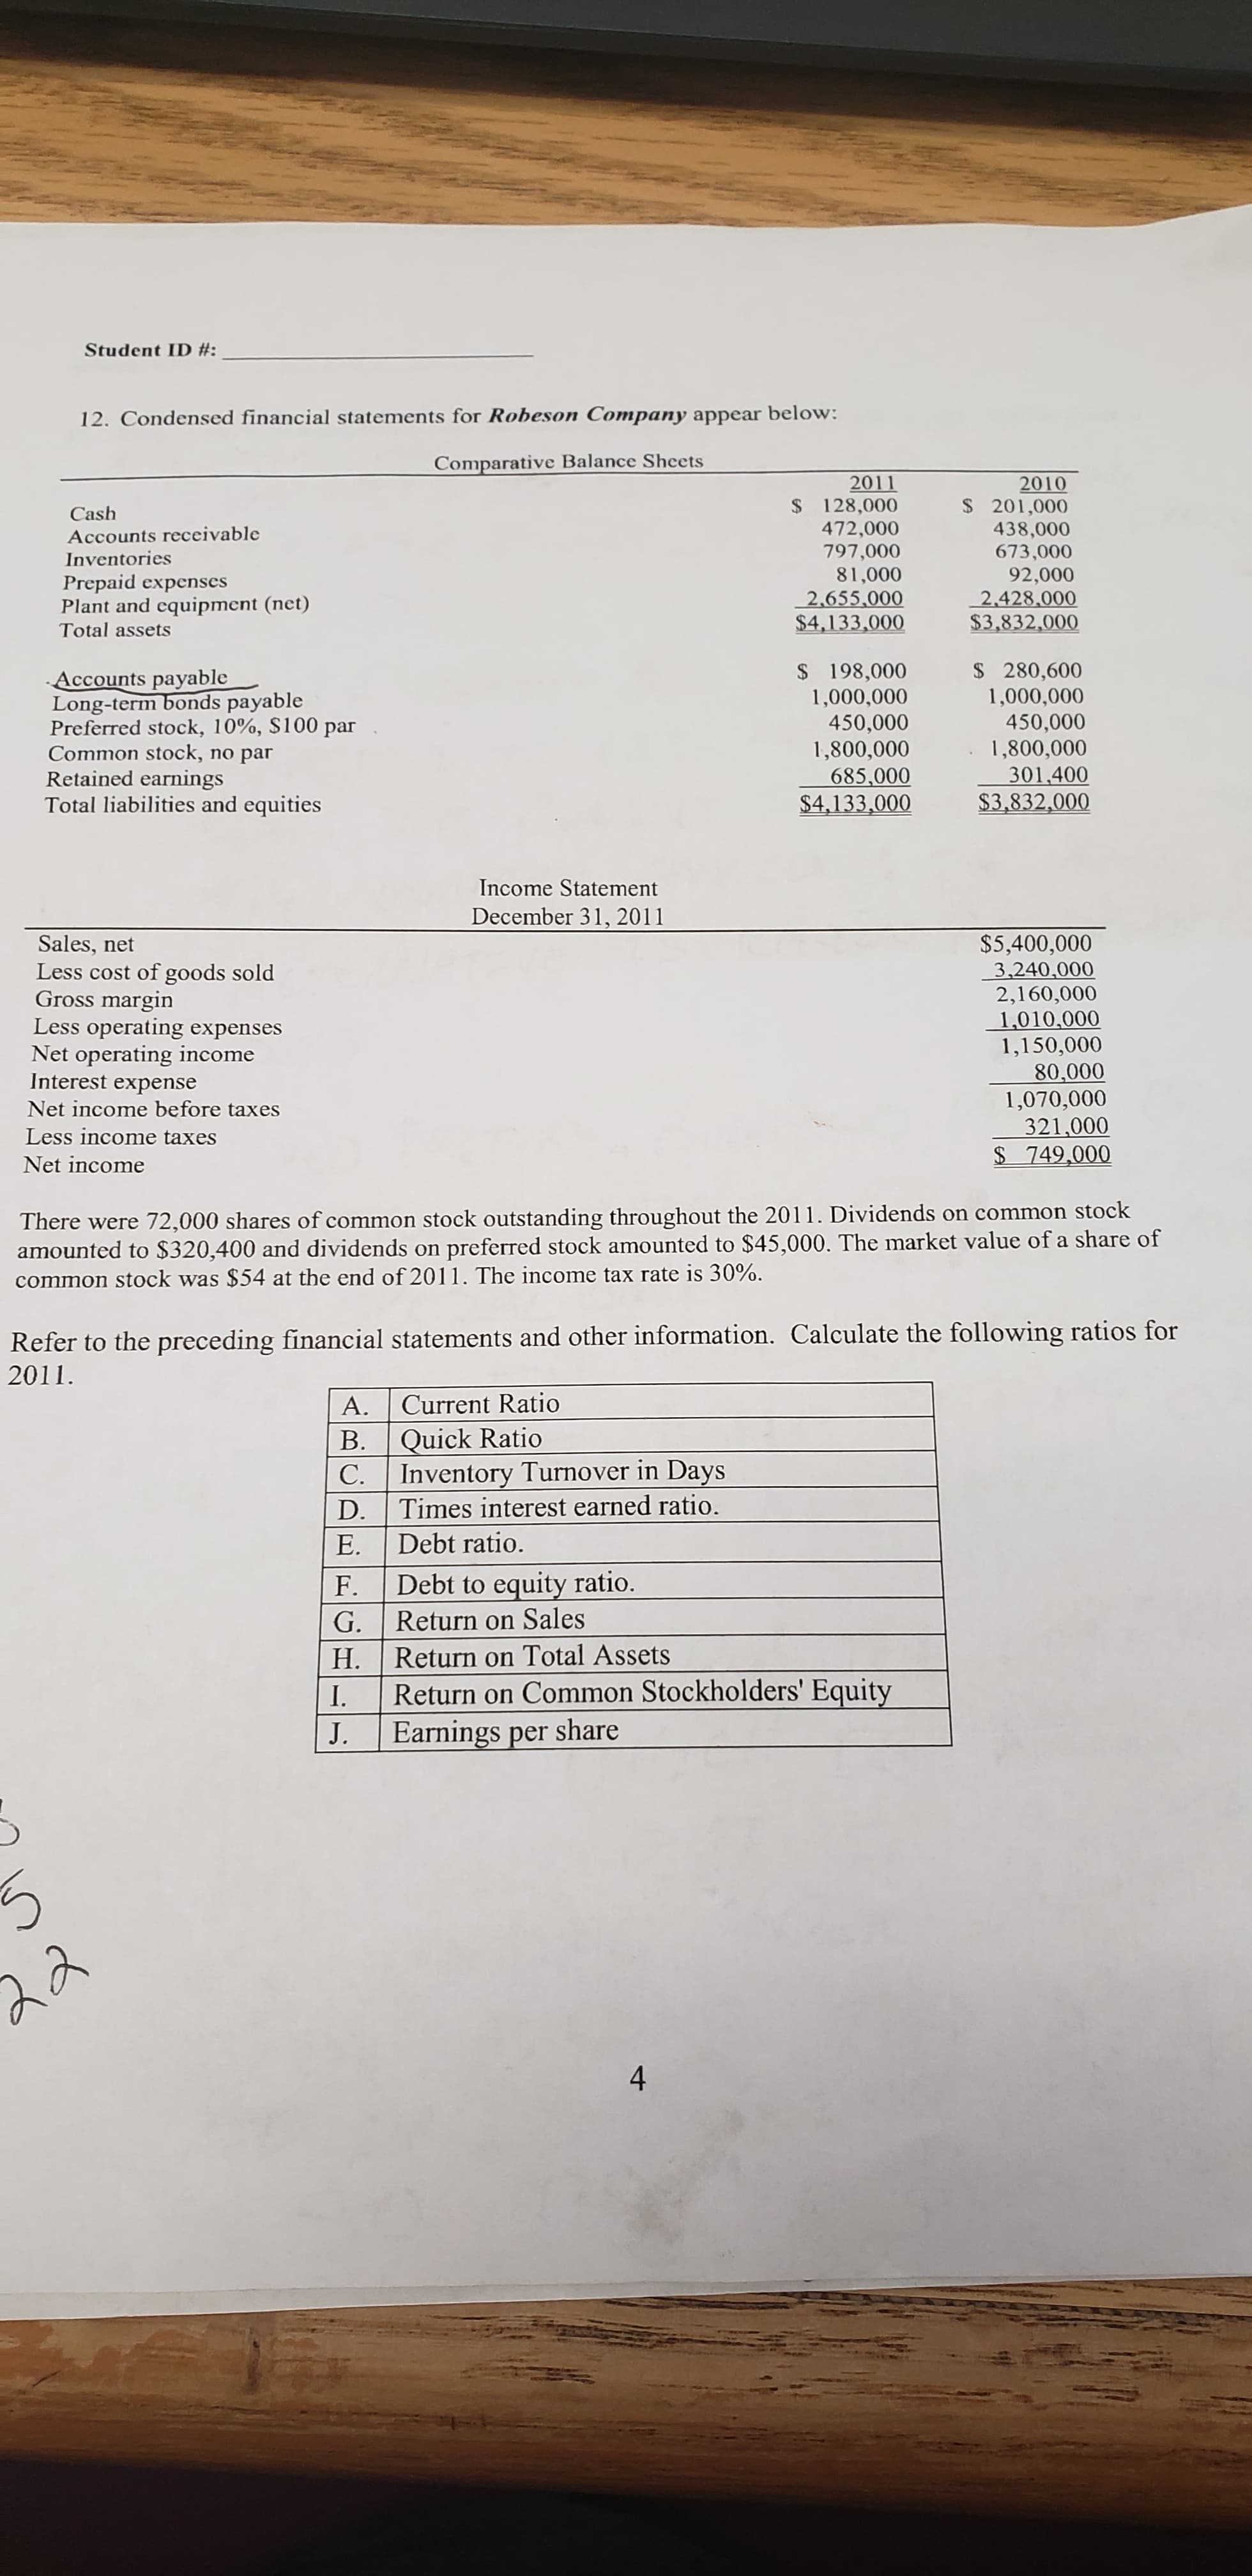 4.
Student ID #:
12. Condensed financial statements for Robeson Company appear below:
Comparative Balance Sheets
2010
$ 201,000
438,000
673,000
Cash
$ 128,000
Accounts receivable
Inventories
472,000
797,000
Prepaid expenses
Plant and equipment (net)
Total assets
000'18
2,655,000
$4,133,000
2,428.000
$3,832,000
Accounts payable
Long-term bonds payable
Preferred stock, 10%, S100 par
Common stock, no par
Retained earnings
Total liabilities and equities
$ 198,000
1,000,000
450,000
1,800,000
685,000
$4,133,000
$ 280,600
1,000,000
450,000
1,800,000
301.400
$3,832,000
Income Statement
December 31, 2011
Sales, net
Less cost of goods sold
Gross margin
$5,400,000
3,240,000
2,160,000
1,010,000
1,150,000
Less operating expenses
Net operating income
Interest expense
Net income before taxes
1,070,000
000
$749,000
Less income taxes
Net income
There were 72,000 shares of common stock outstanding throughout the 2011. Dividends on common stock
amounted to $320,400 and dividends on preferred stock amounted to $45,000. The market value of a share of
common stock was $54 at the end of 2011. The income tax rate is 30%.
Refer to the preceding financial statements and other information. Calculate the following ratios for
2011.
A.
Current Ratio
B. Quick Ratio
Inventory Turnover in Days
C.
D. Times interest earned ratio.
E.
Debt ratio.
Debt to equity ratio.
G. Return on Sales
F.
H.
Return on Common Stockholders' Equity
Return on Total Assets
J.
Earnings per share
22
